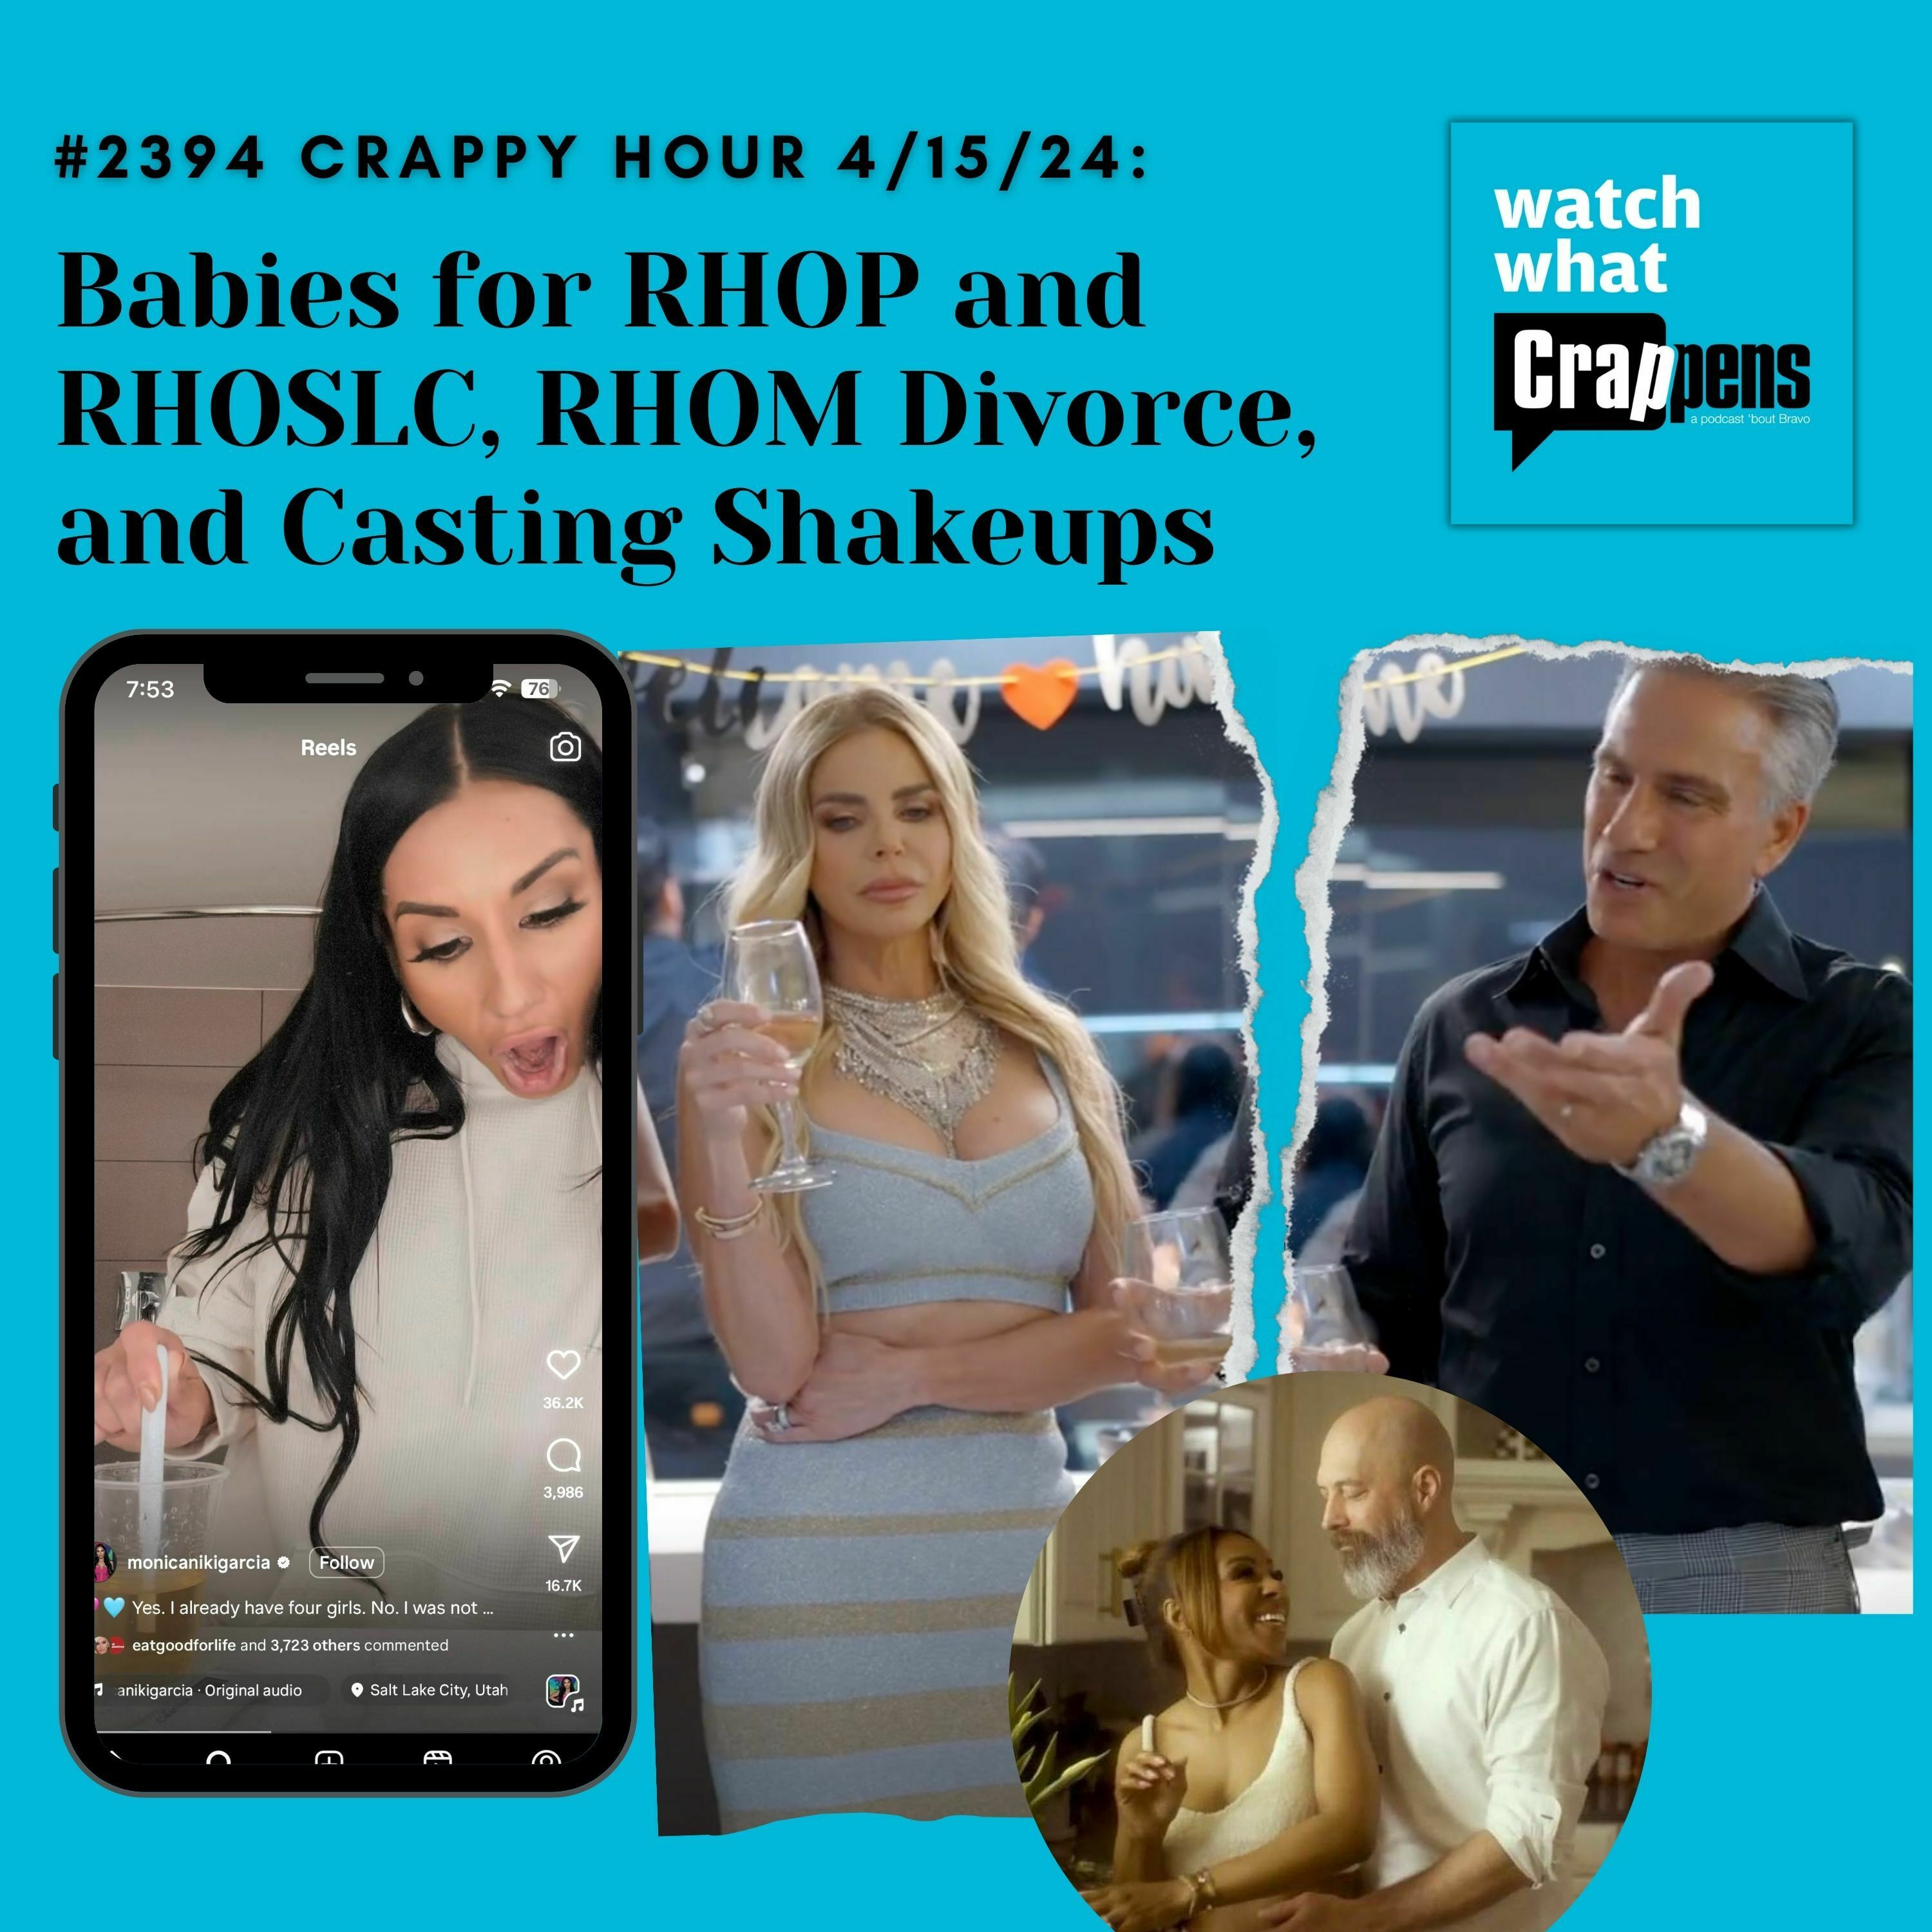 #2394 Crappy Hour 4/15/24: Babies for RHOP and RHOSLC, RHOM Divorce, and Casting Shakeups